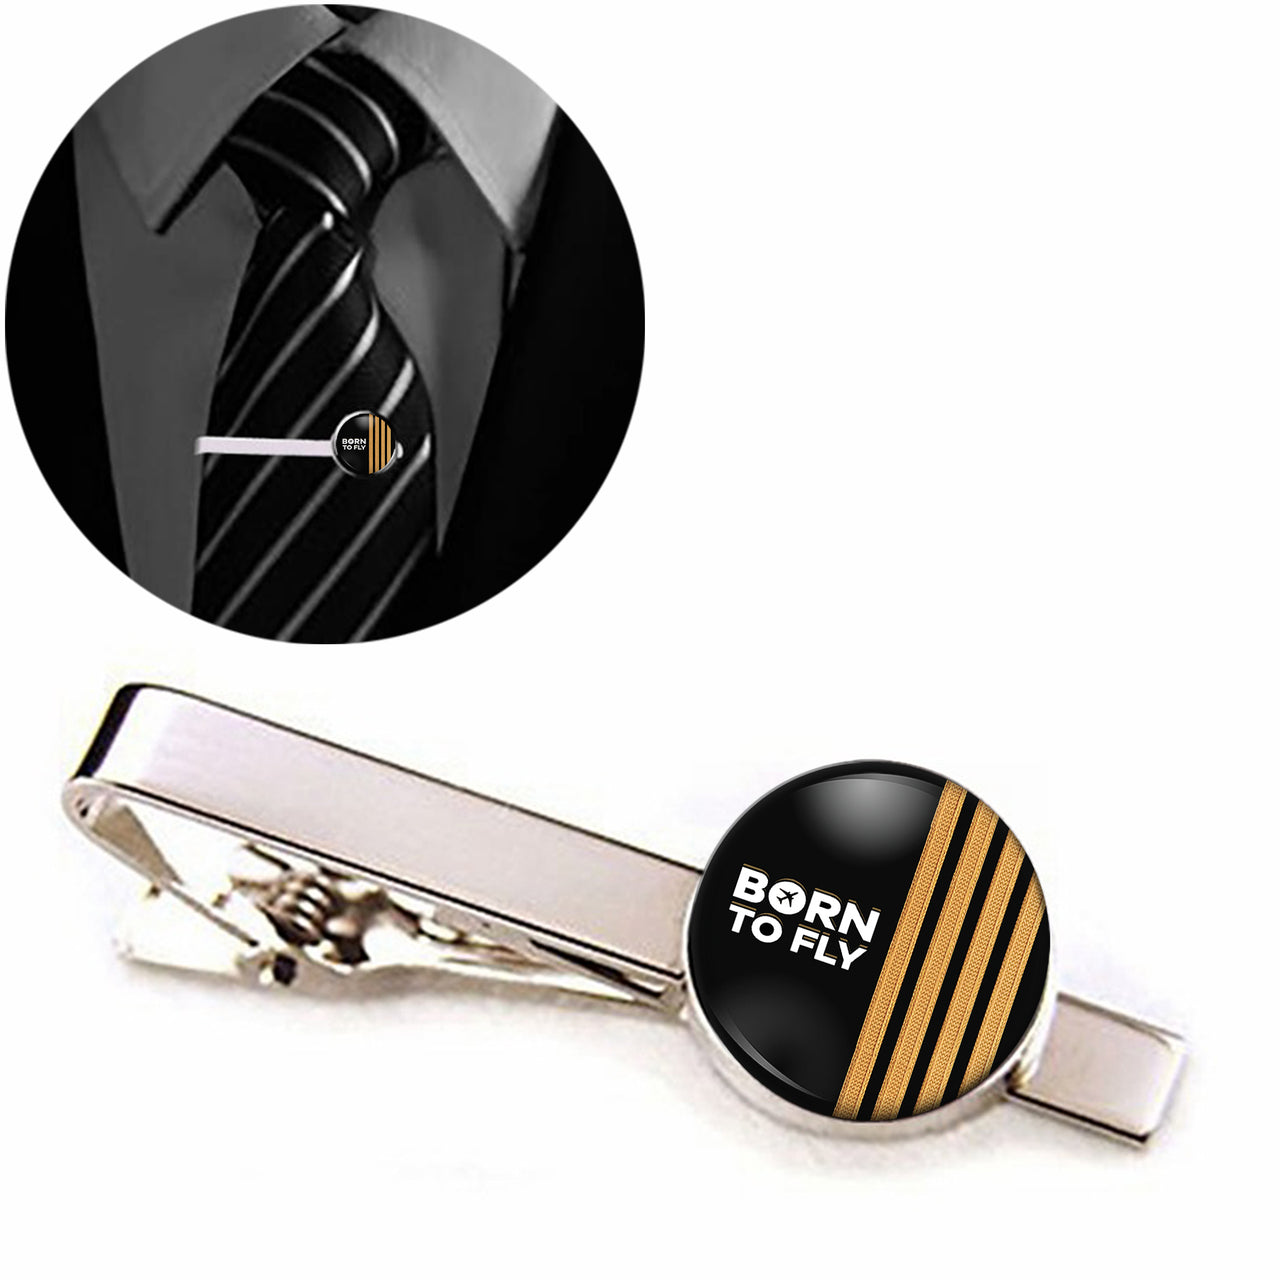 Born To Fly & Pilot Epaulettes (4 Lines) Designed Tie Clips